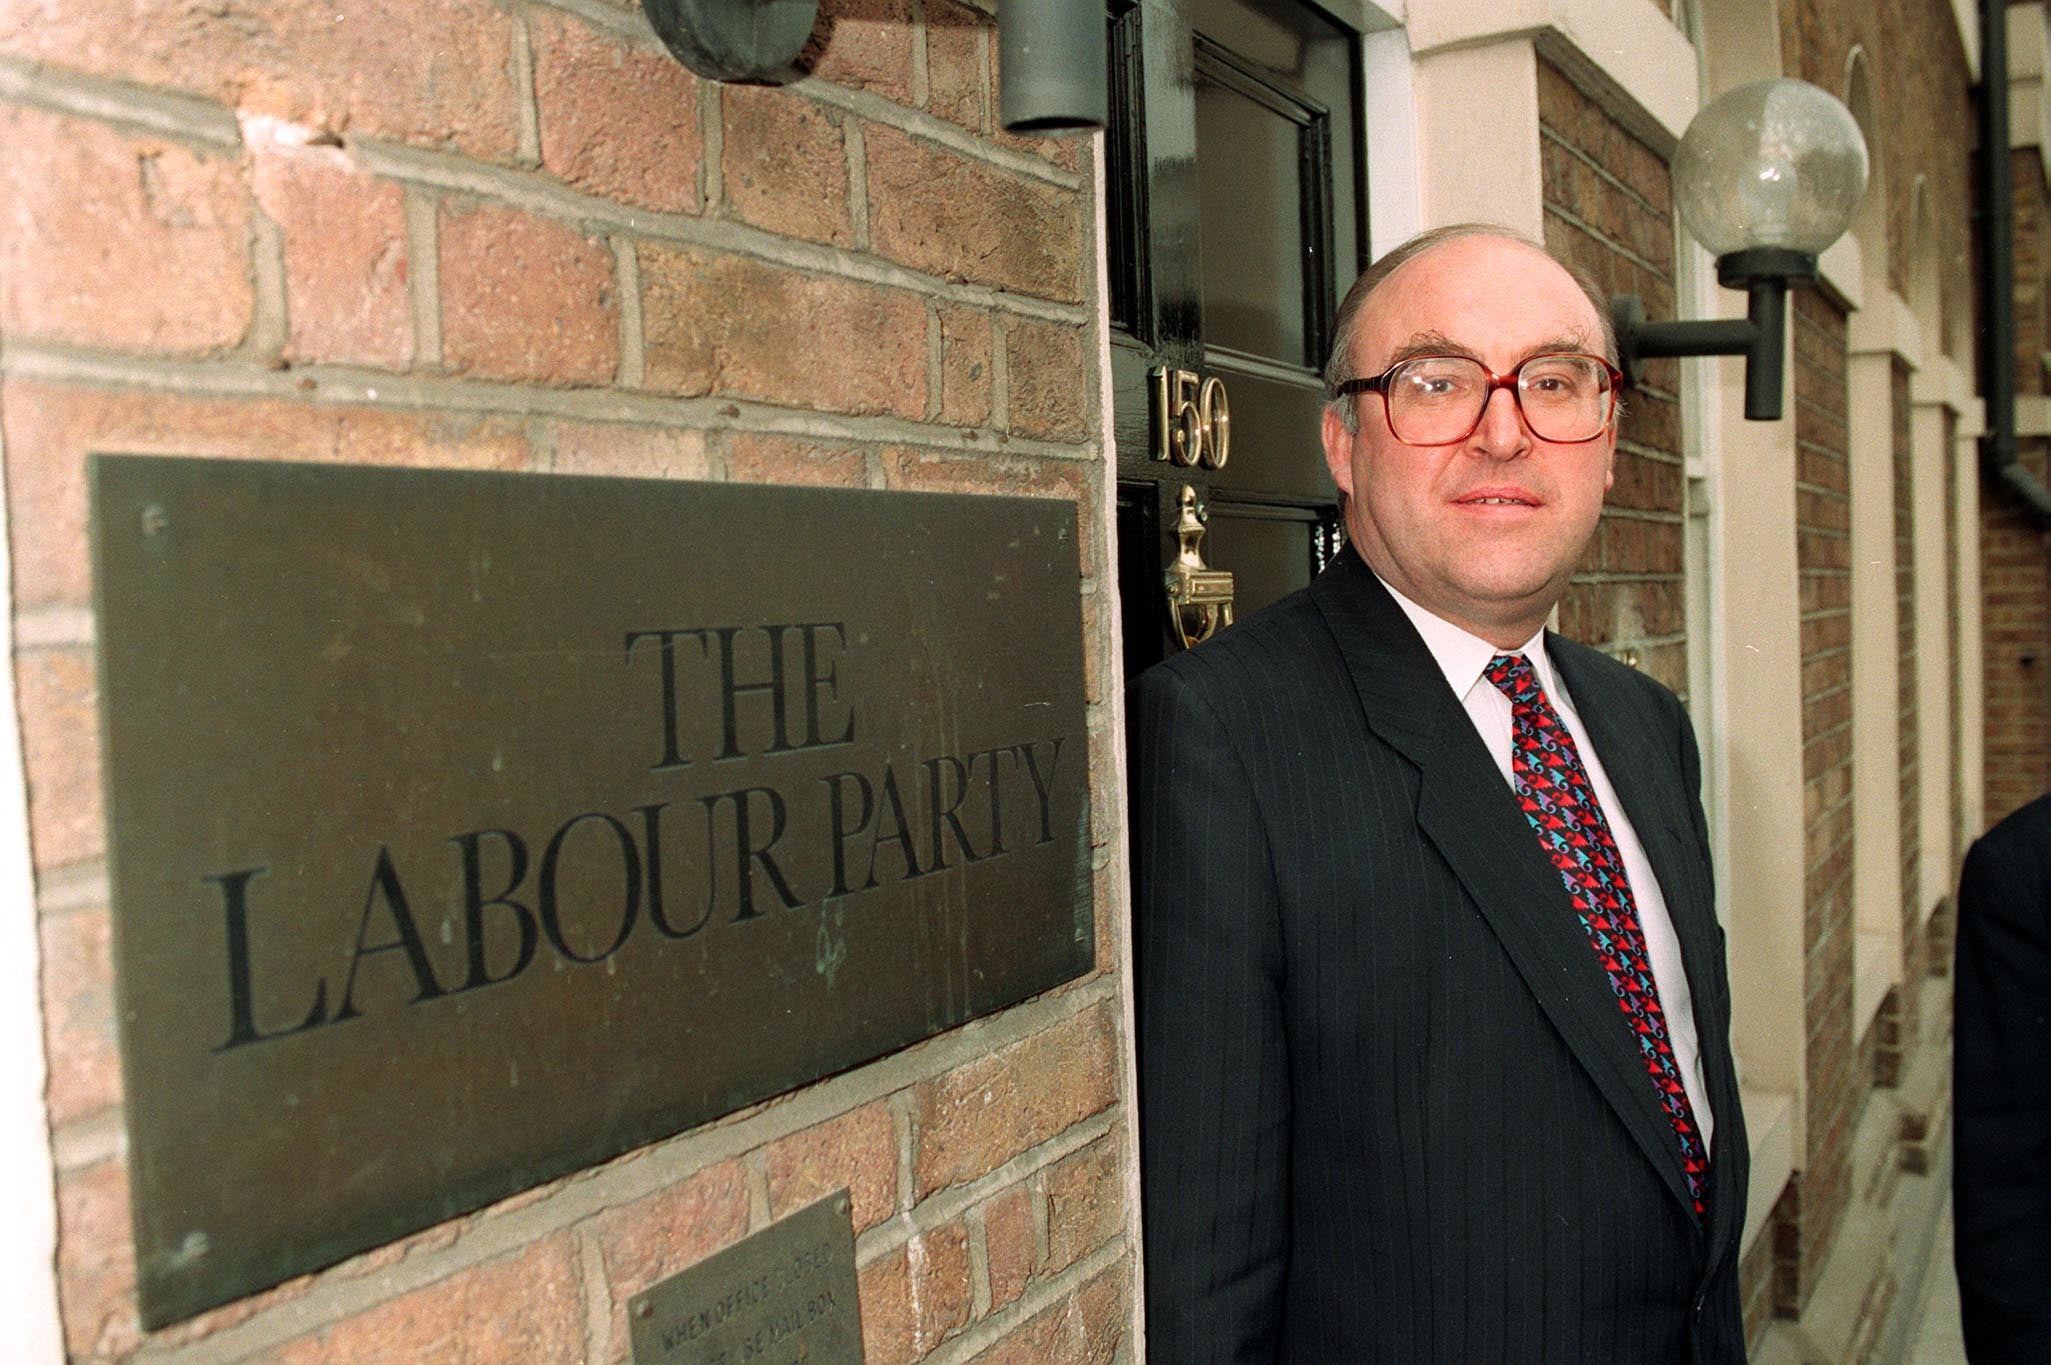 Smith outside Labour Party headquarters in London in 1993